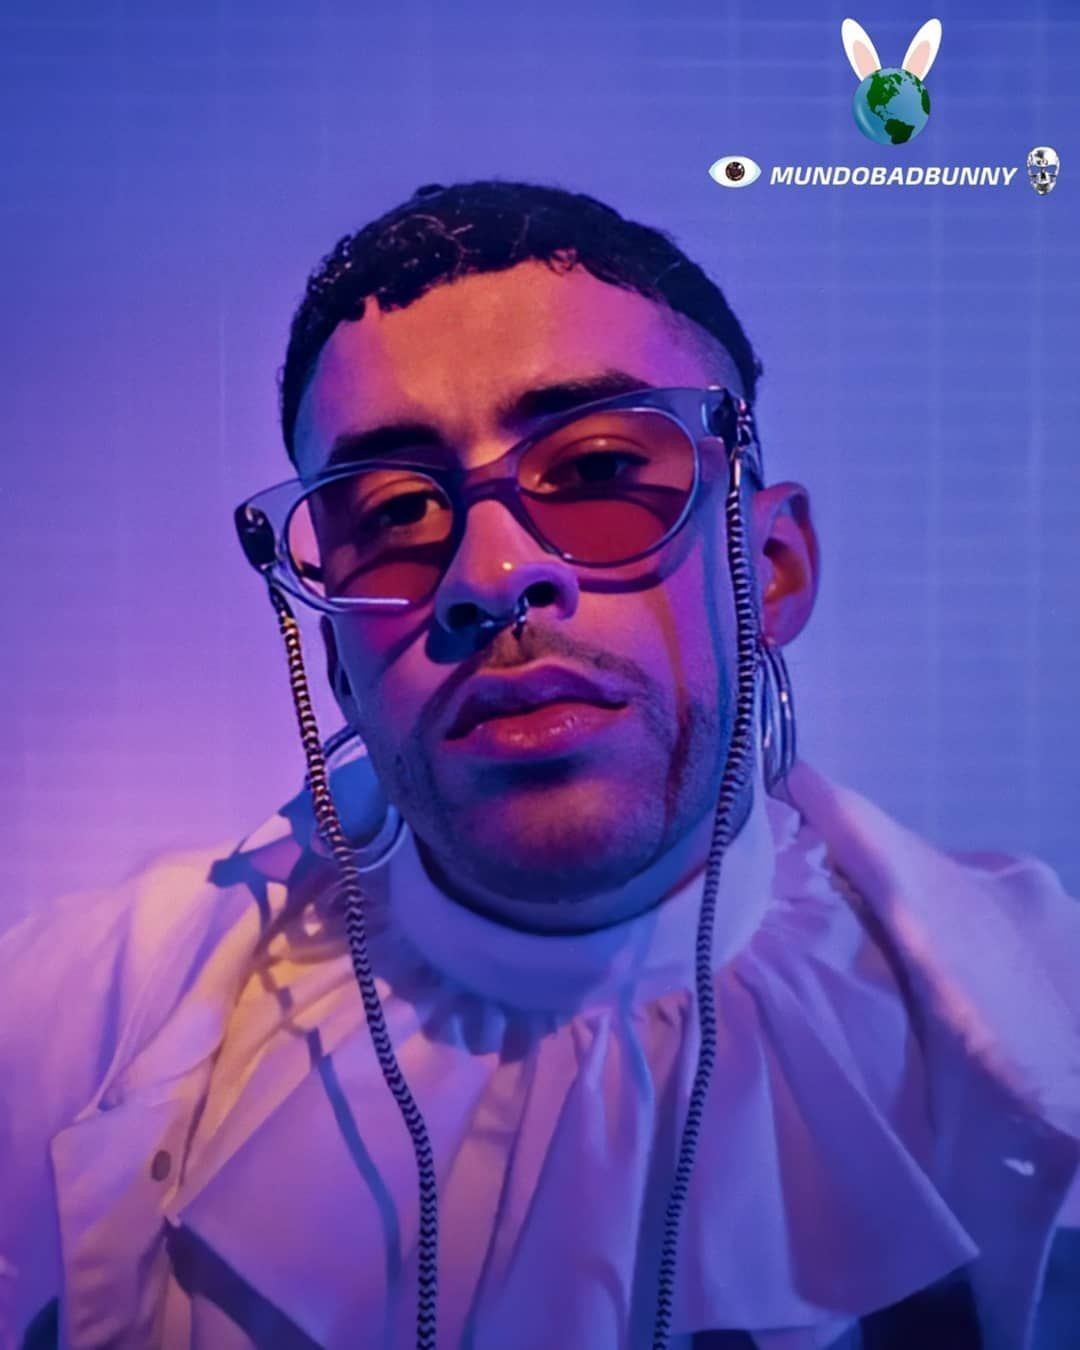 A man with a nose ring and glasses - Bad Bunny